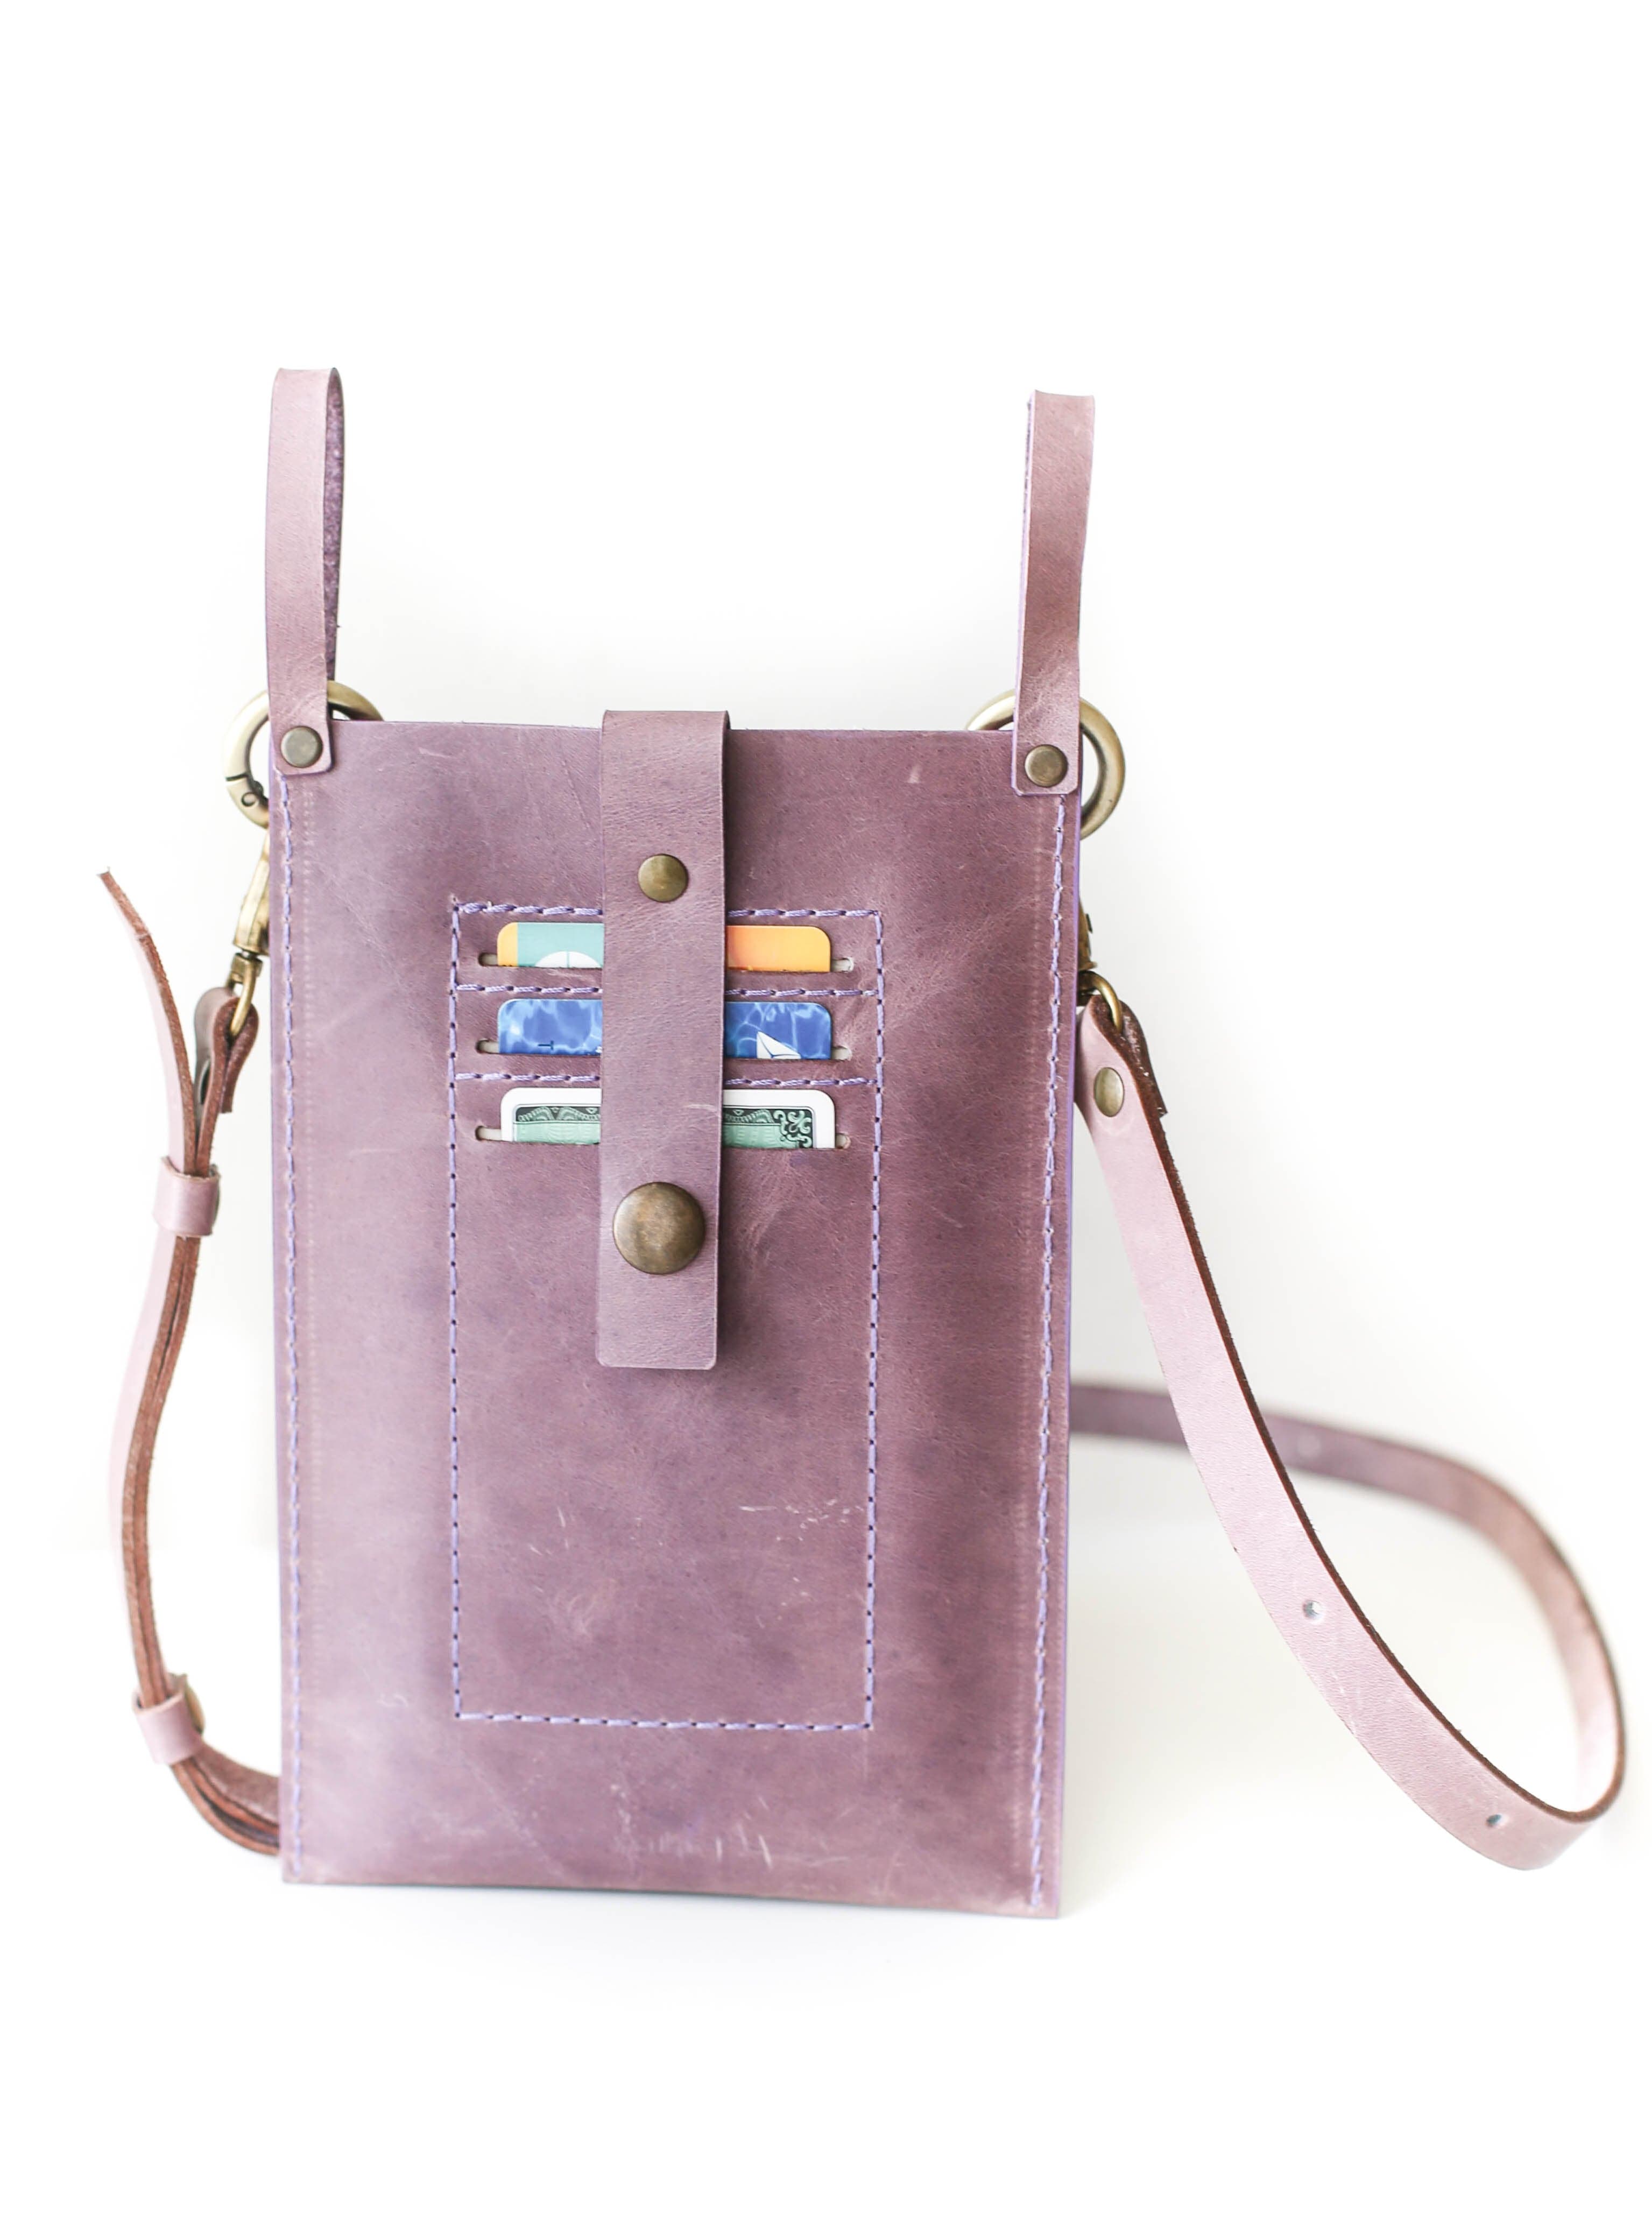 2-in-1 Crossbody Wallet Phone Case in Dove Blue - Mahalo Cases